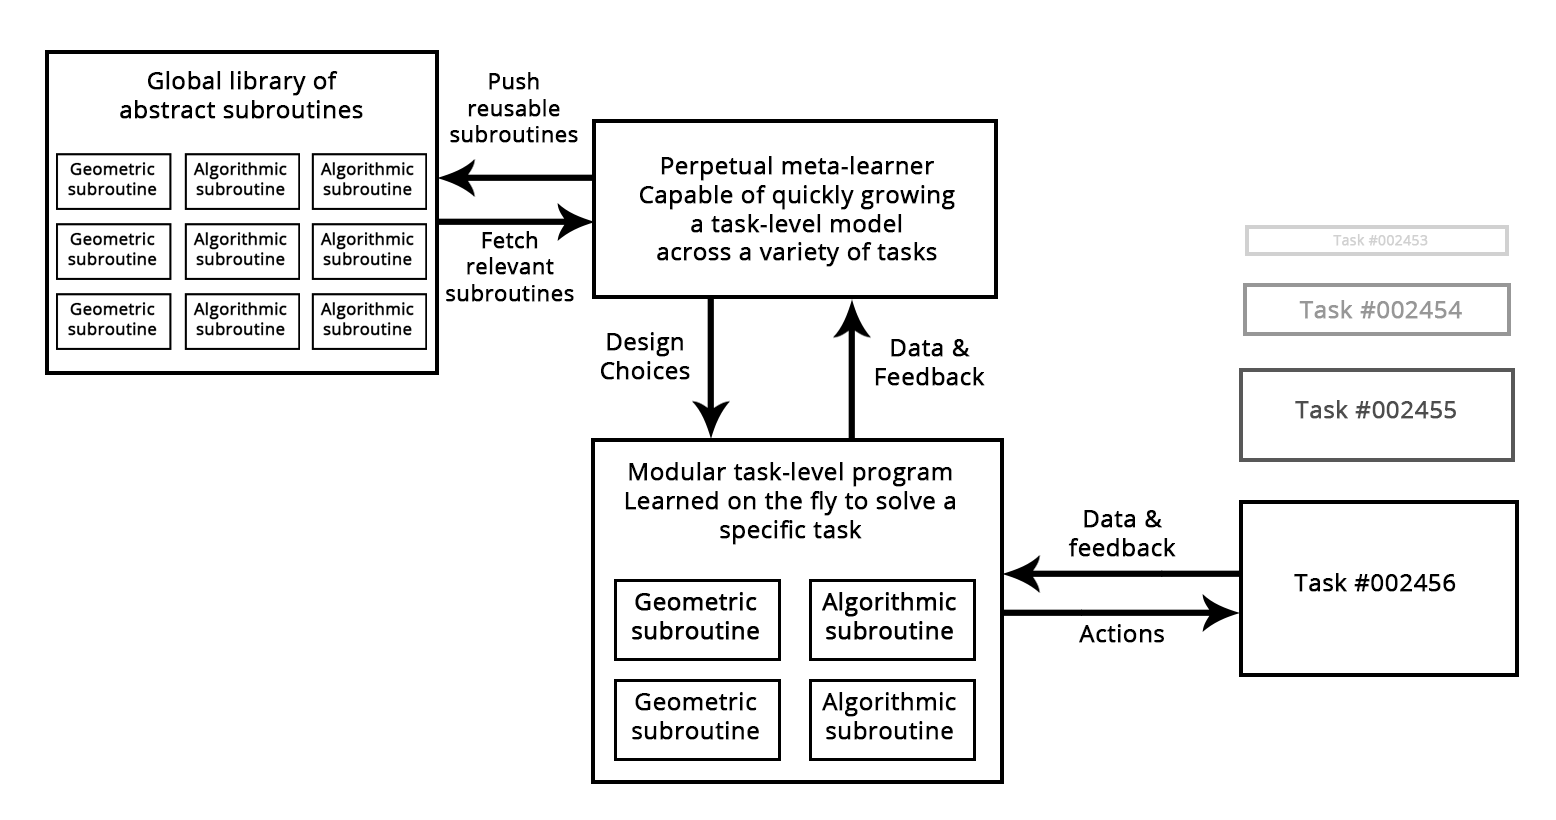 A meta-learner capable of quickly developing task-specific models using reusable primitives (both algorithmic and geometric), thus achieving "extreme generalization".